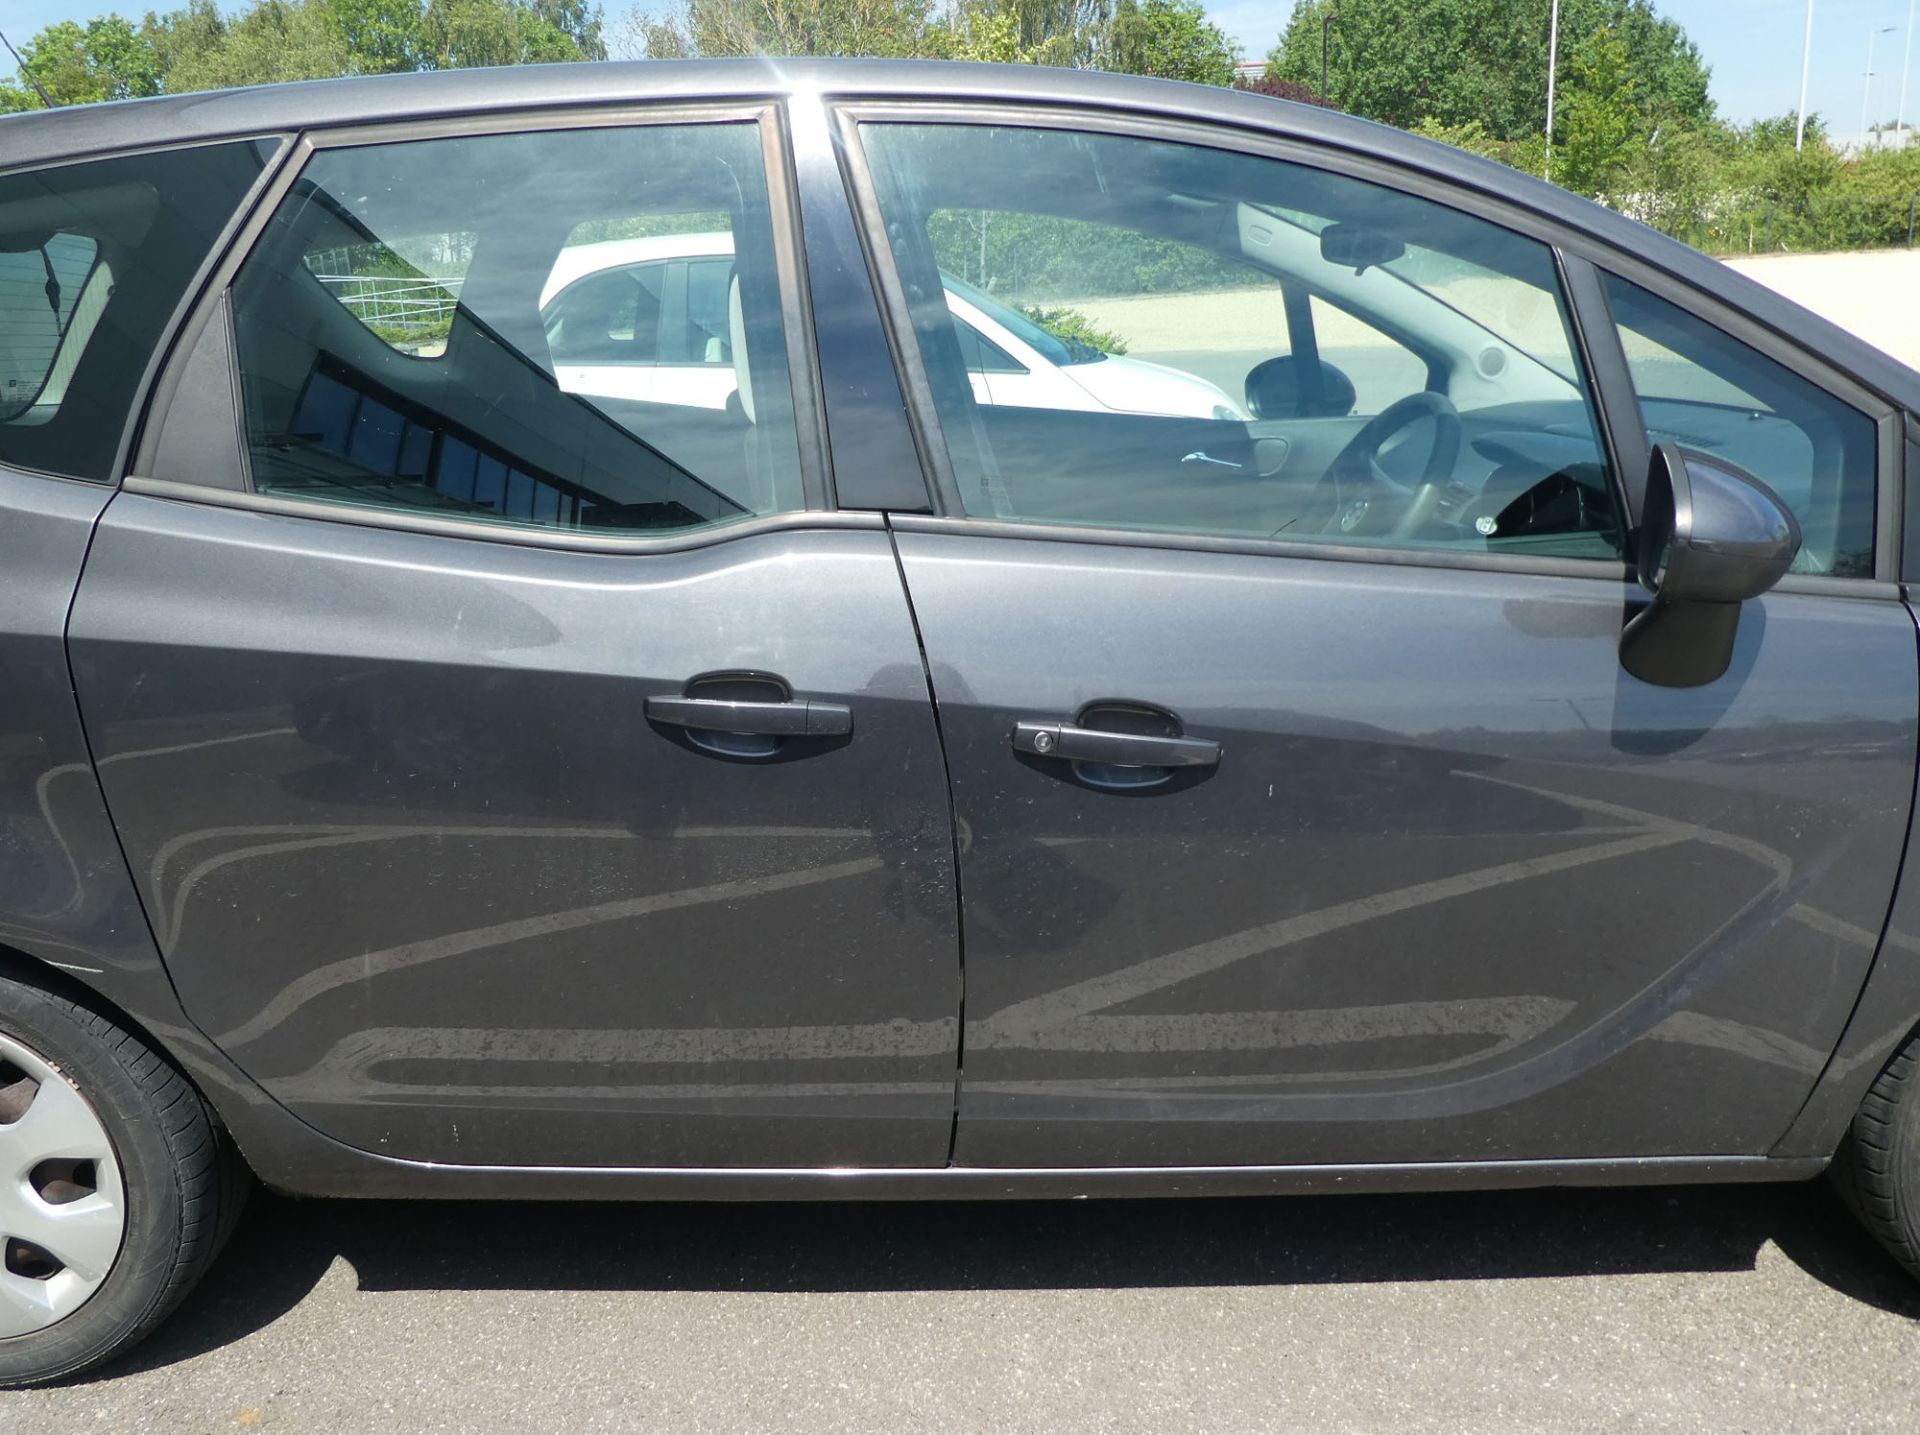 Vauxhall Meriva Exclusiv Turbo 138 in grey, registration plate DU12 WXP, first registered 16.03. - Image 11 of 12